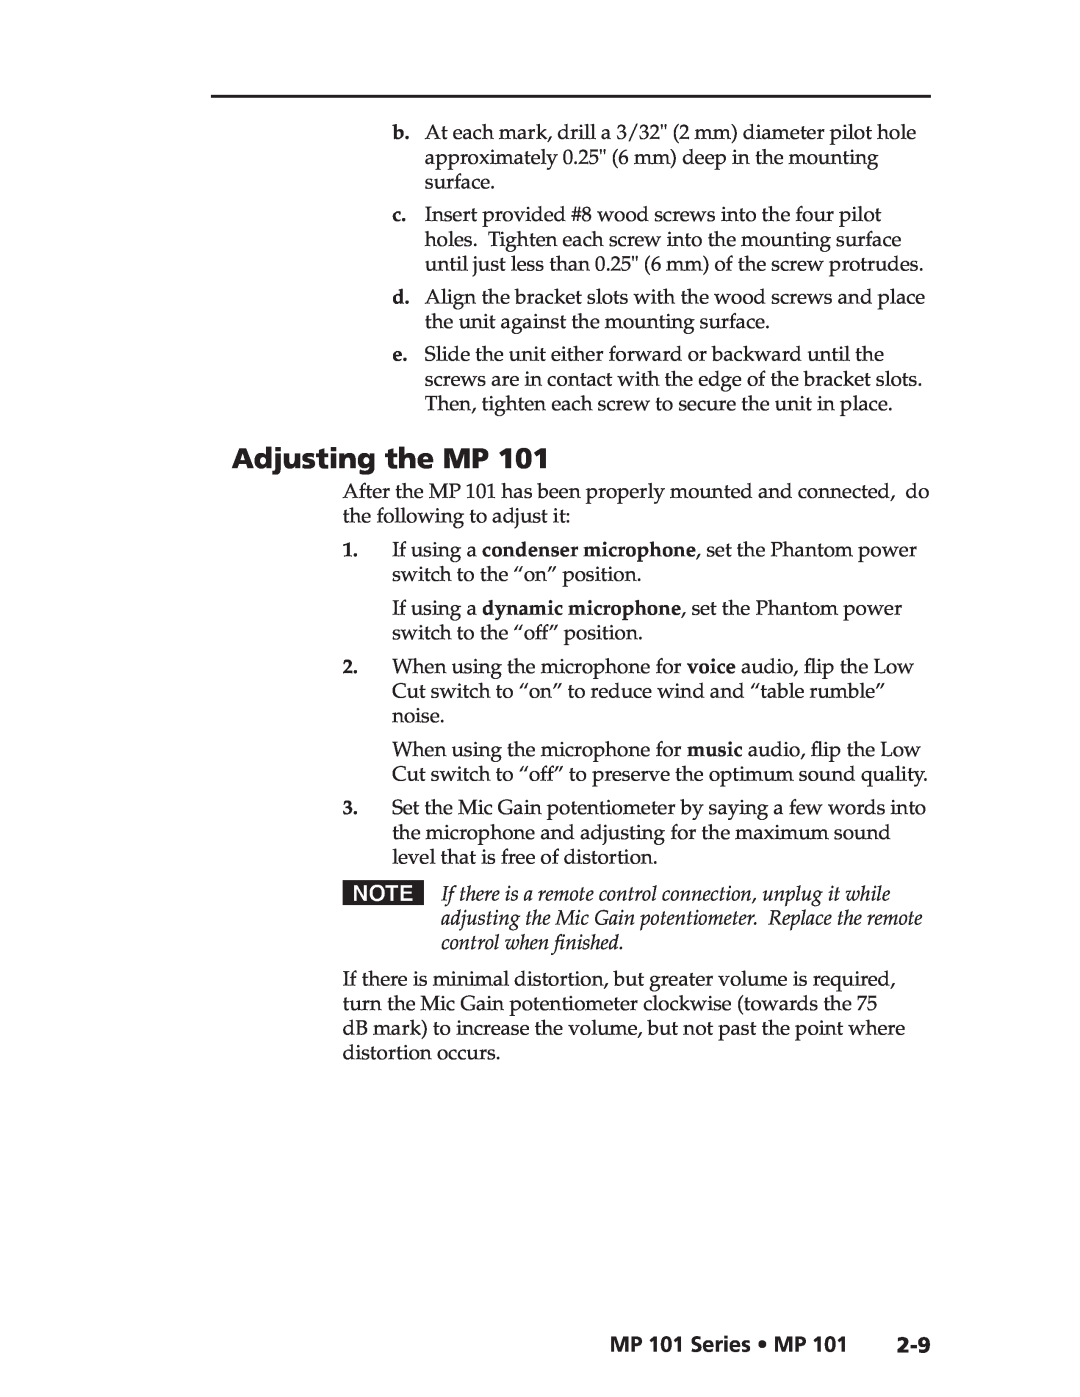 Extron electronic user manual Adjusting the MP, MP 101 Series MP 